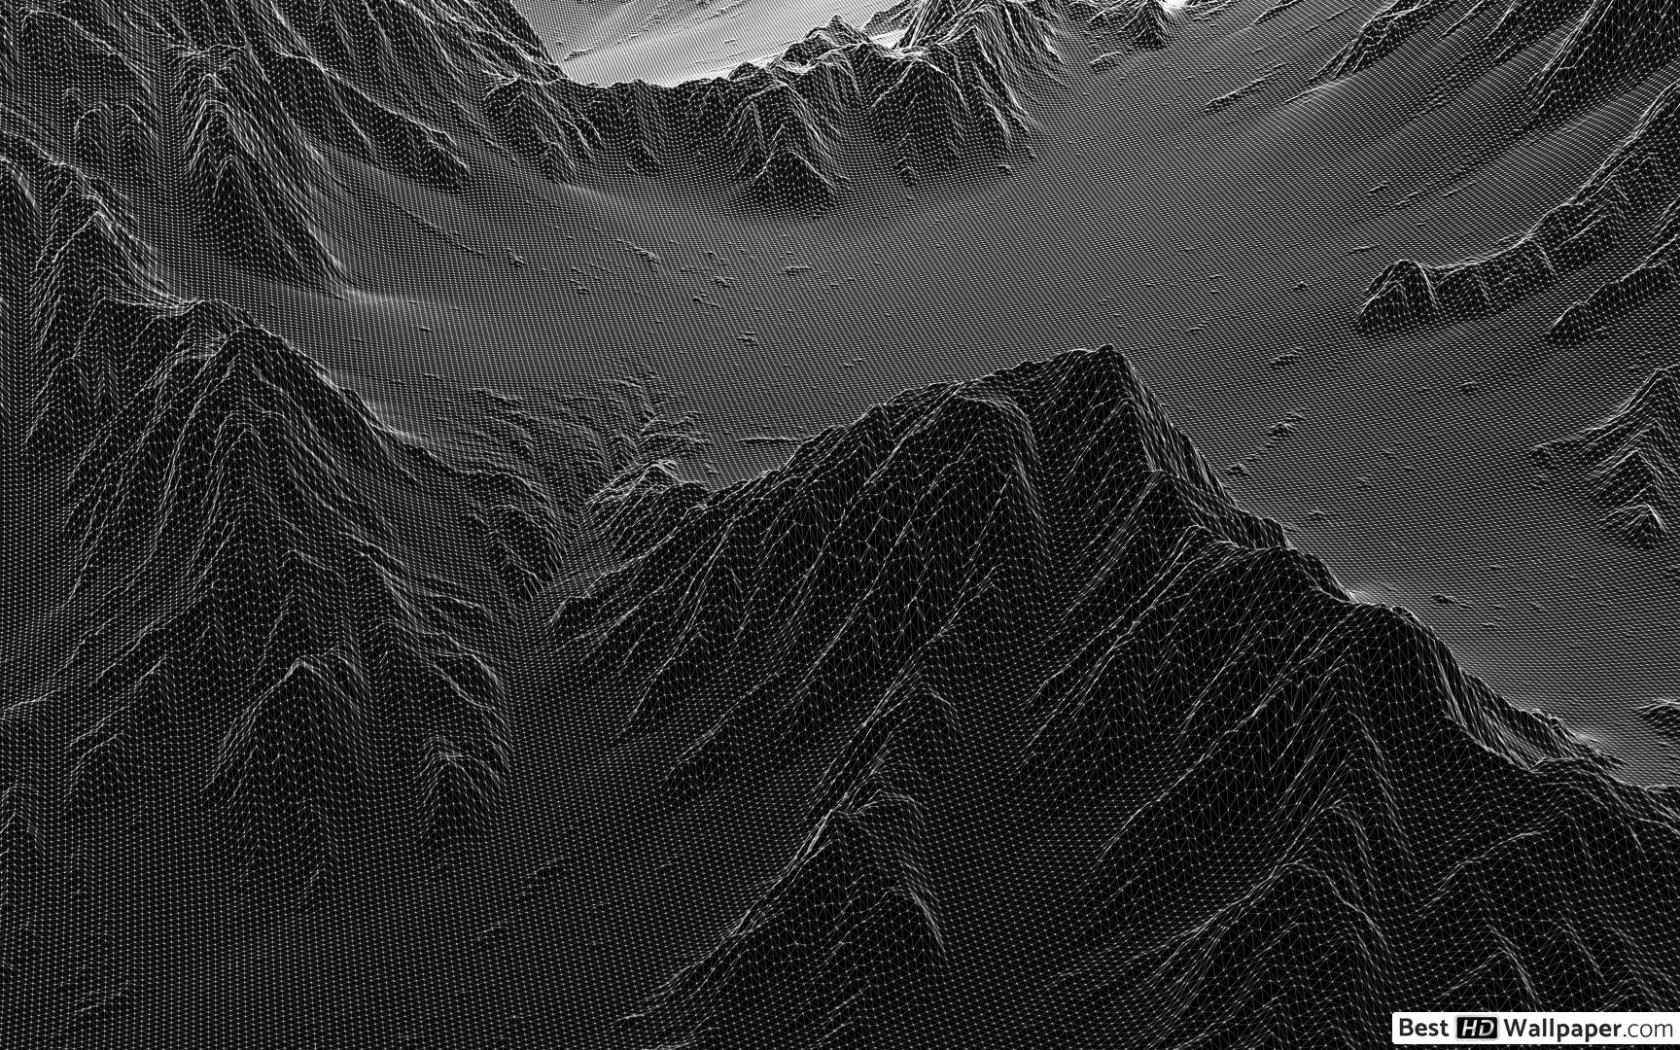 Wide - Mountain Wallpaper Hd 1920x1080 Black And White , HD Wallpaper & Backgrounds